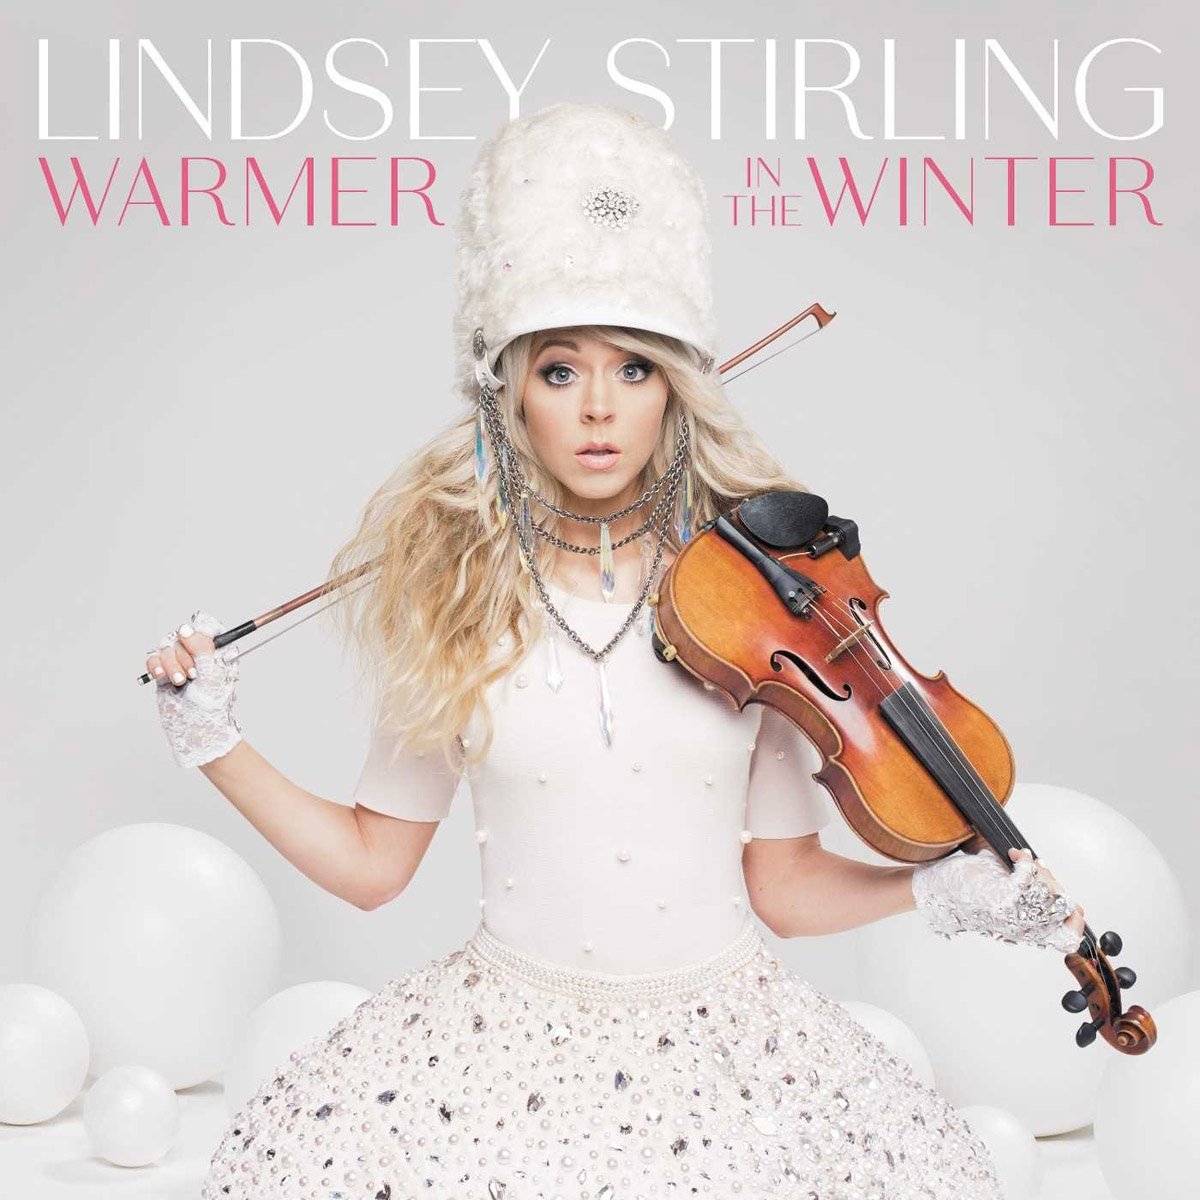 Cd Lindsey Stirling Warmer In The Winter